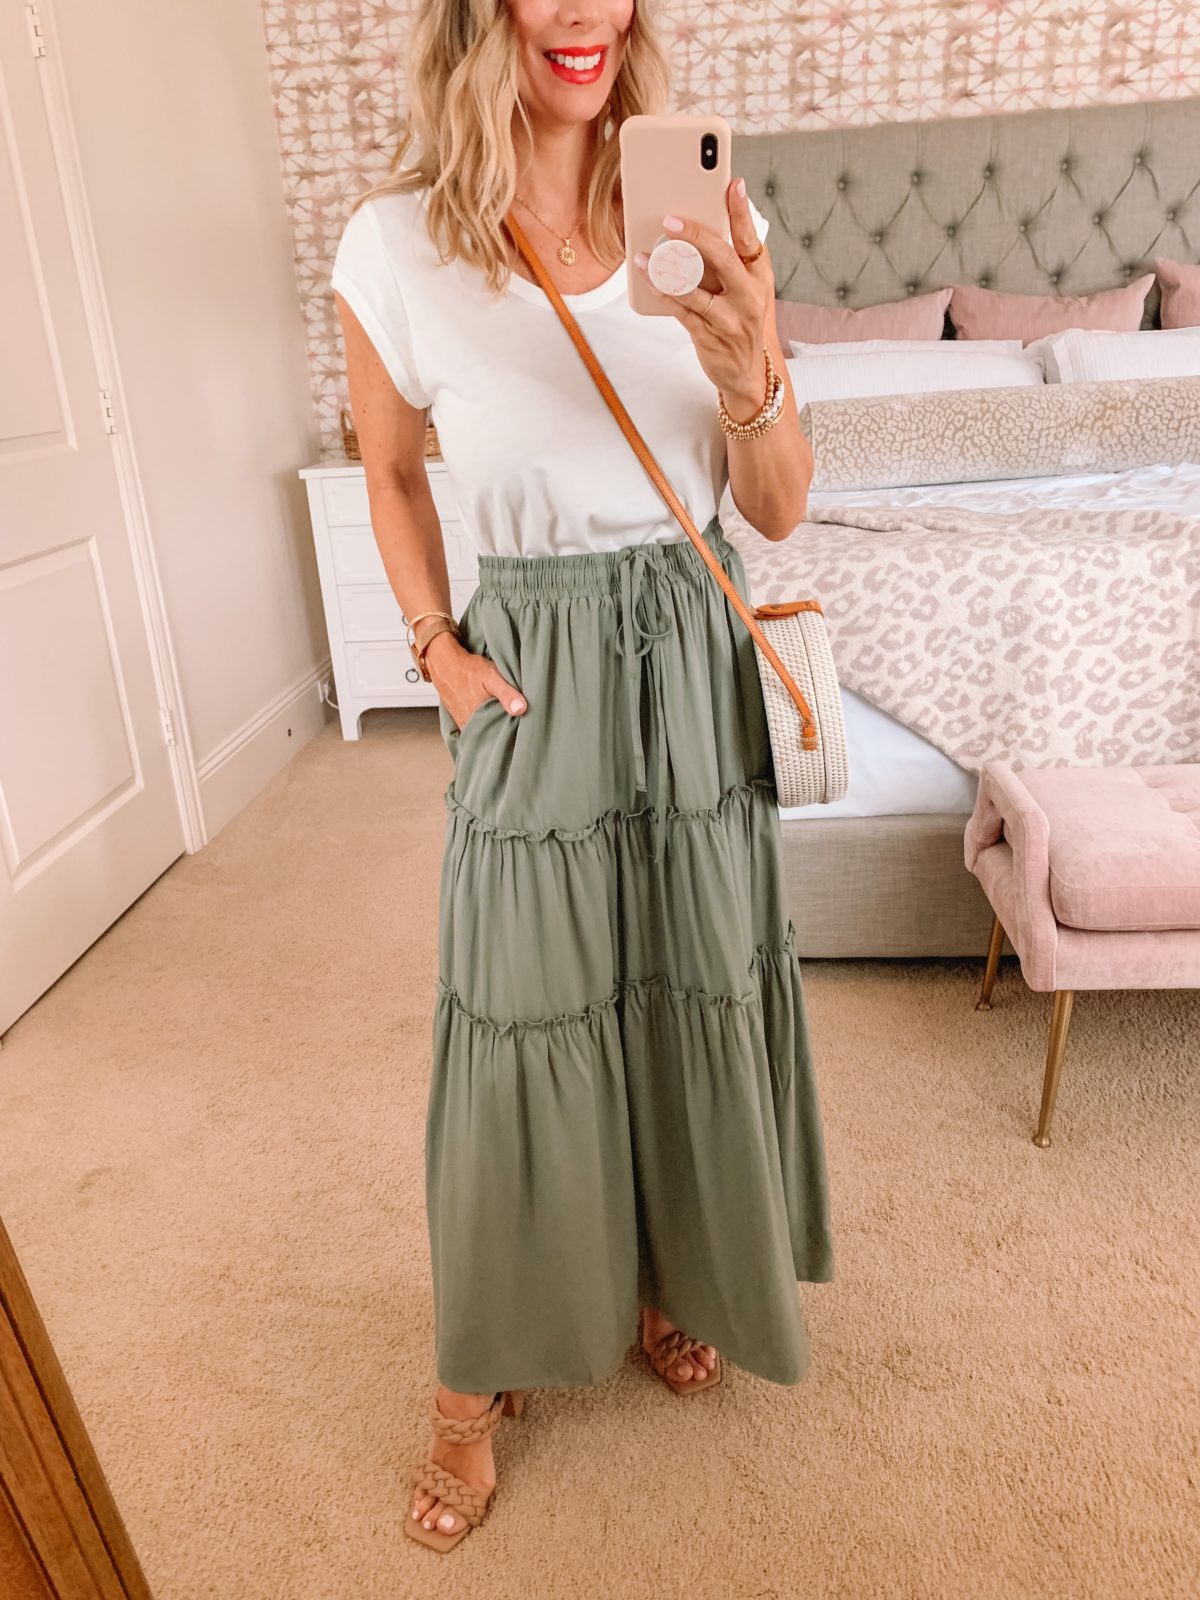 Amazon Fashion Faves, White Tee and Maxi Skirt with Sandals and Crossbody 